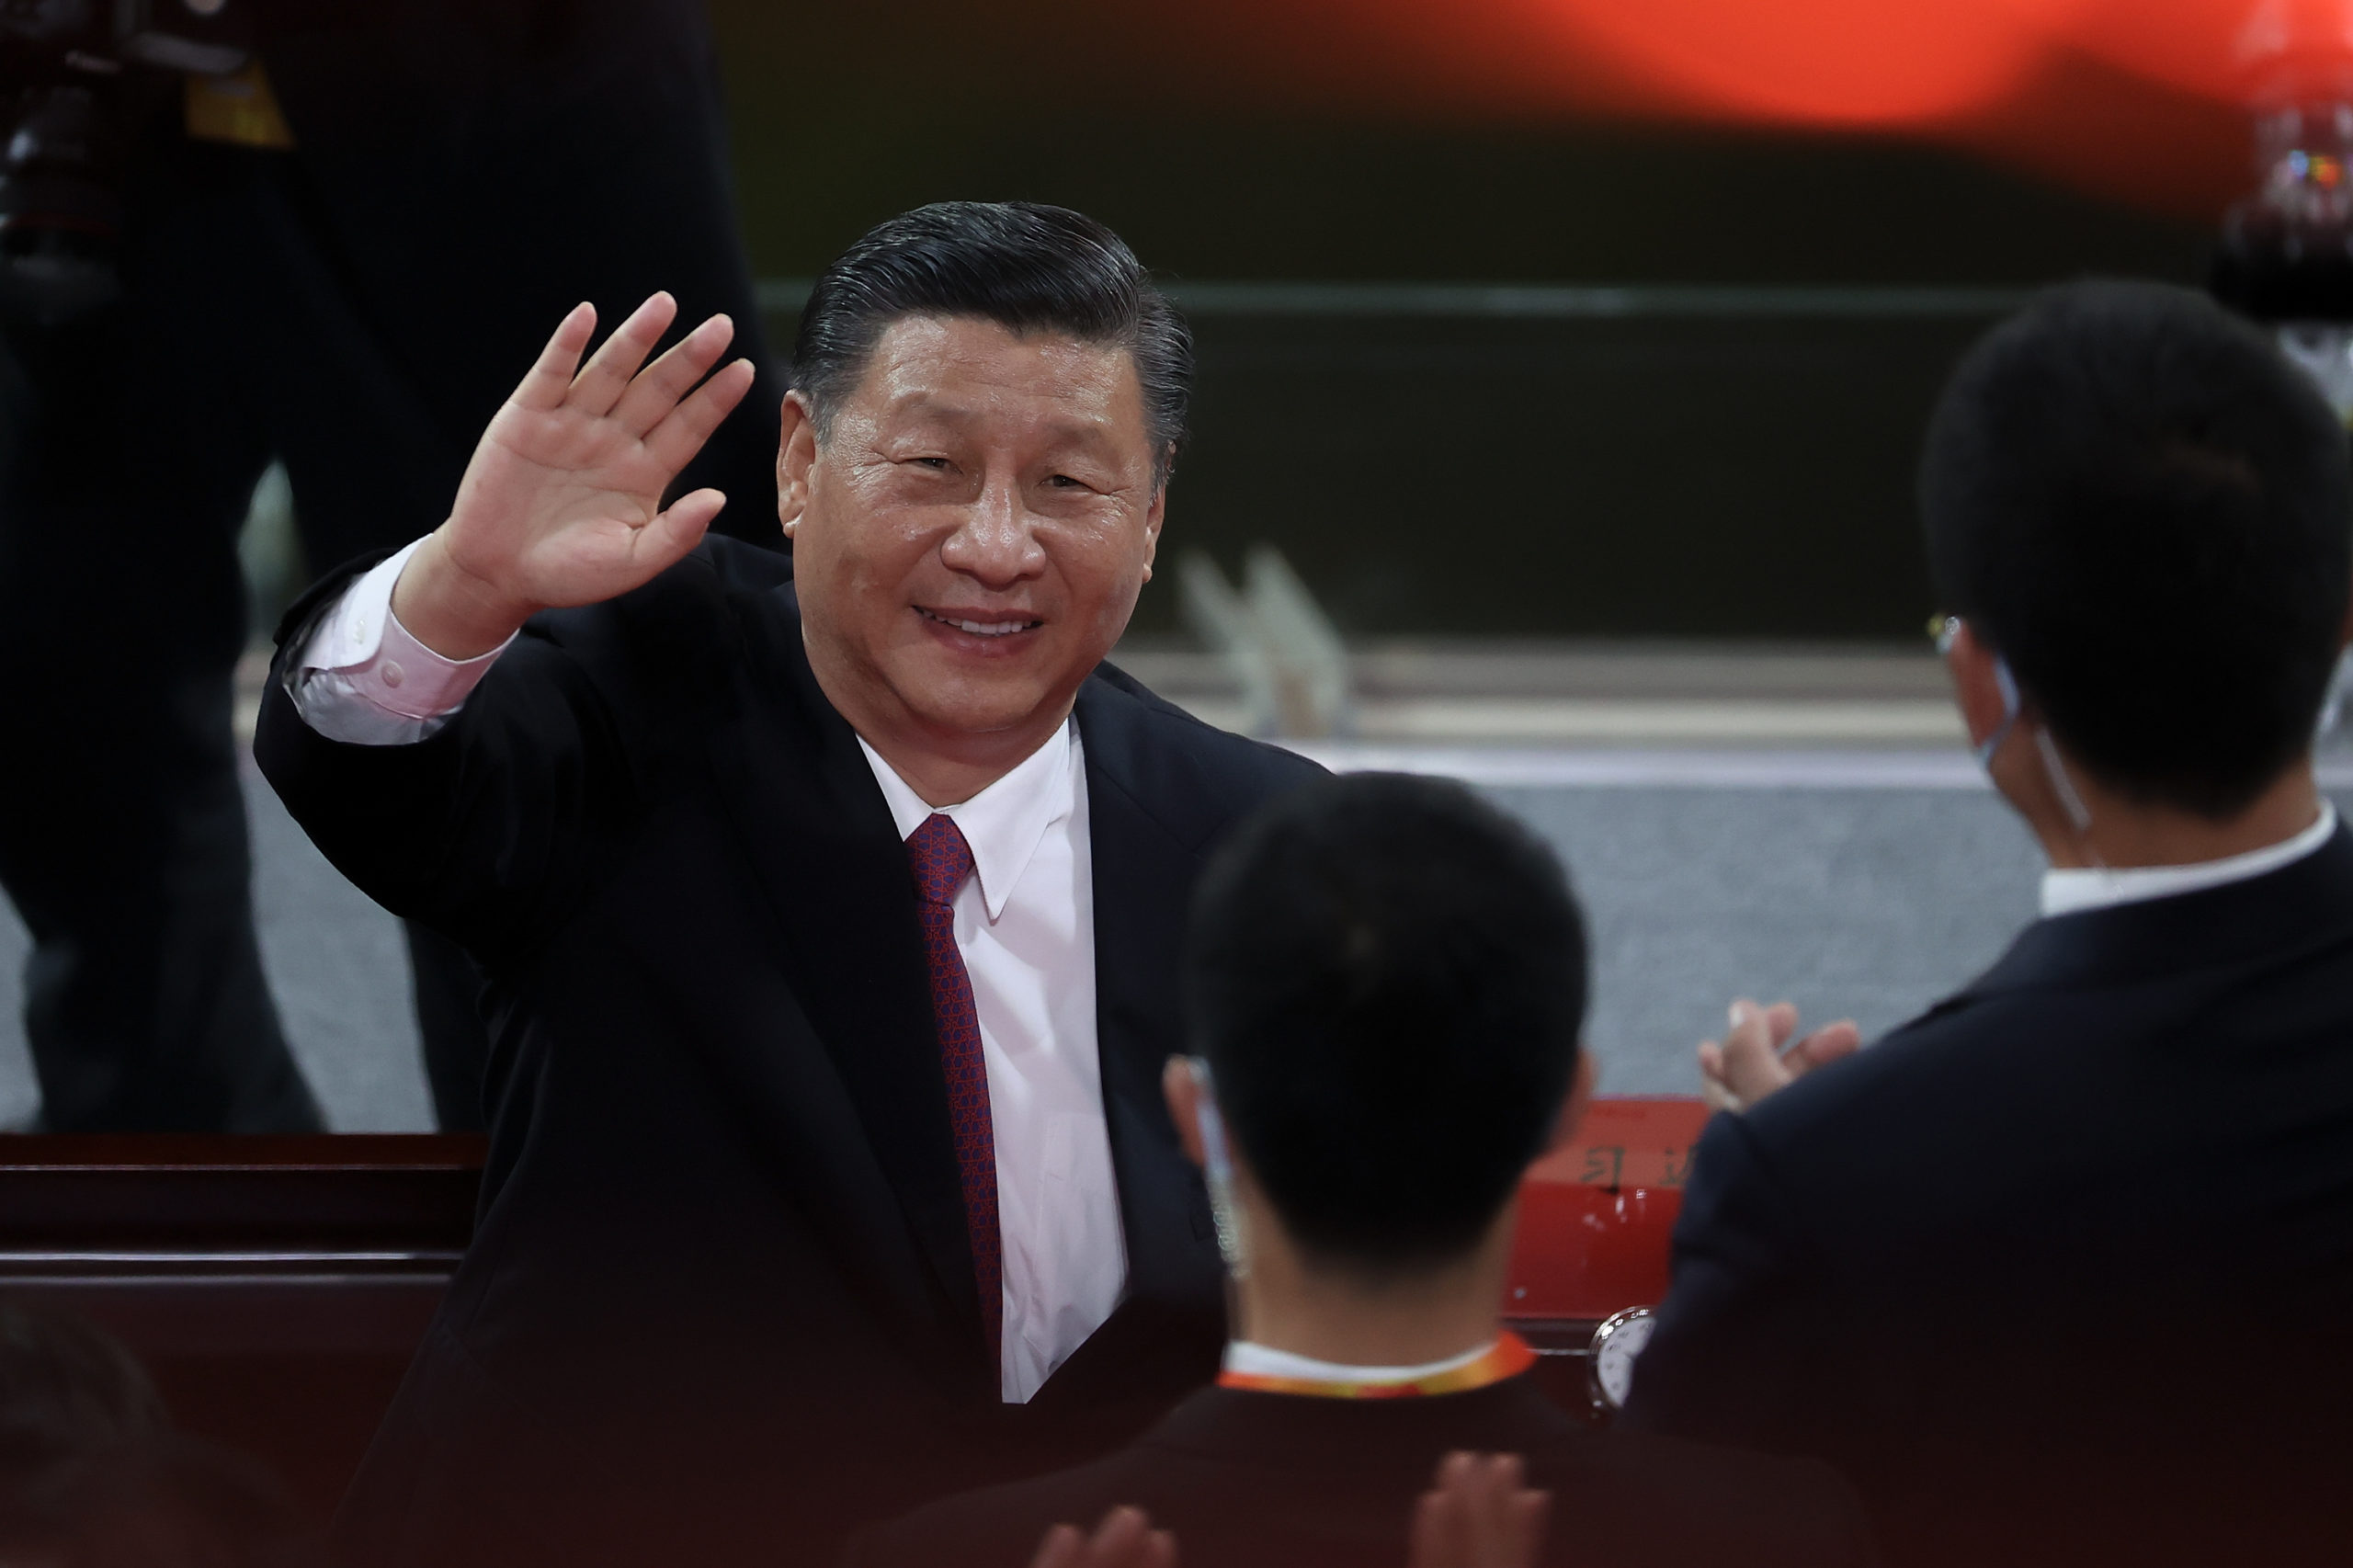 BEIJING, CHINA - JUNE 28: Chinese President Xi Jinping waves as he attends the art performance celebrating the 100th anniversary of the Founding of the Communist Party of China on June 28, 2021 in Beijing, China. Ahead of the 100th anniversary of the party founding on July 1. Final preparations for events to mark the anniversary are under way in the Chinese capital. (Photo by Lintao Zhang/Getty Images)